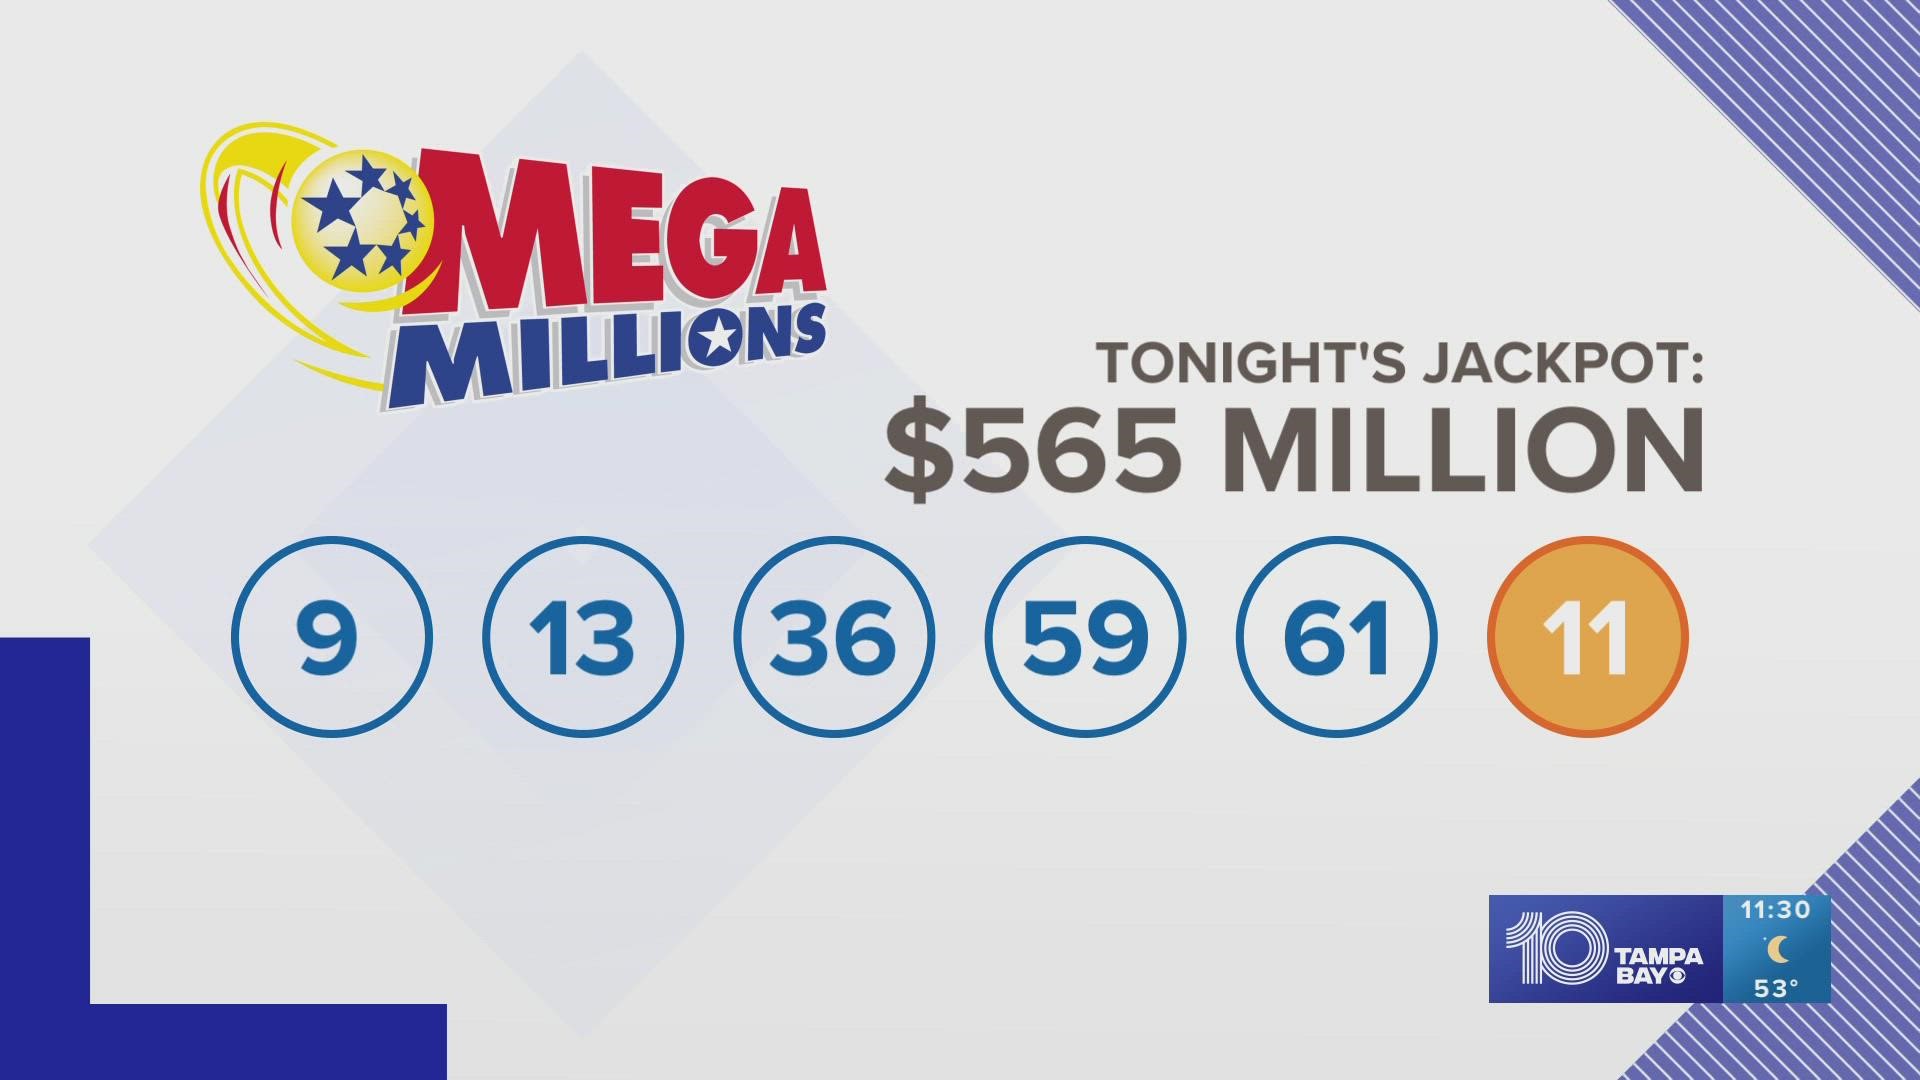 A jackpot worth more than half a billion dollars is up for grabs.